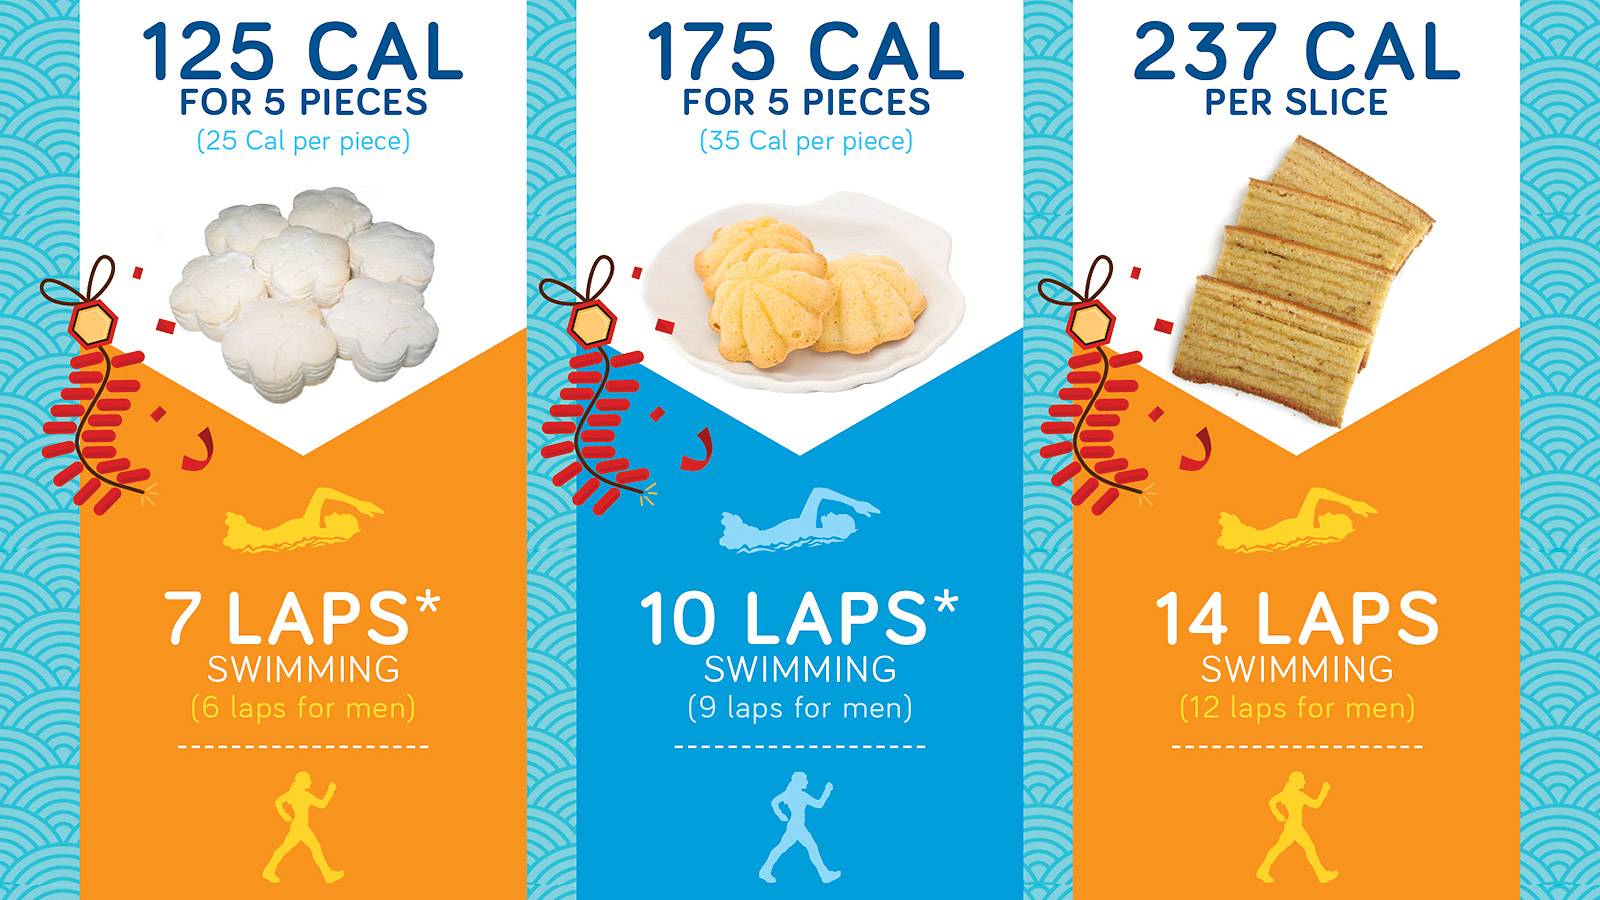 Parents-Beware-of-the-calorie-count-for-CNY-goodies-INFOGRAPHIC3